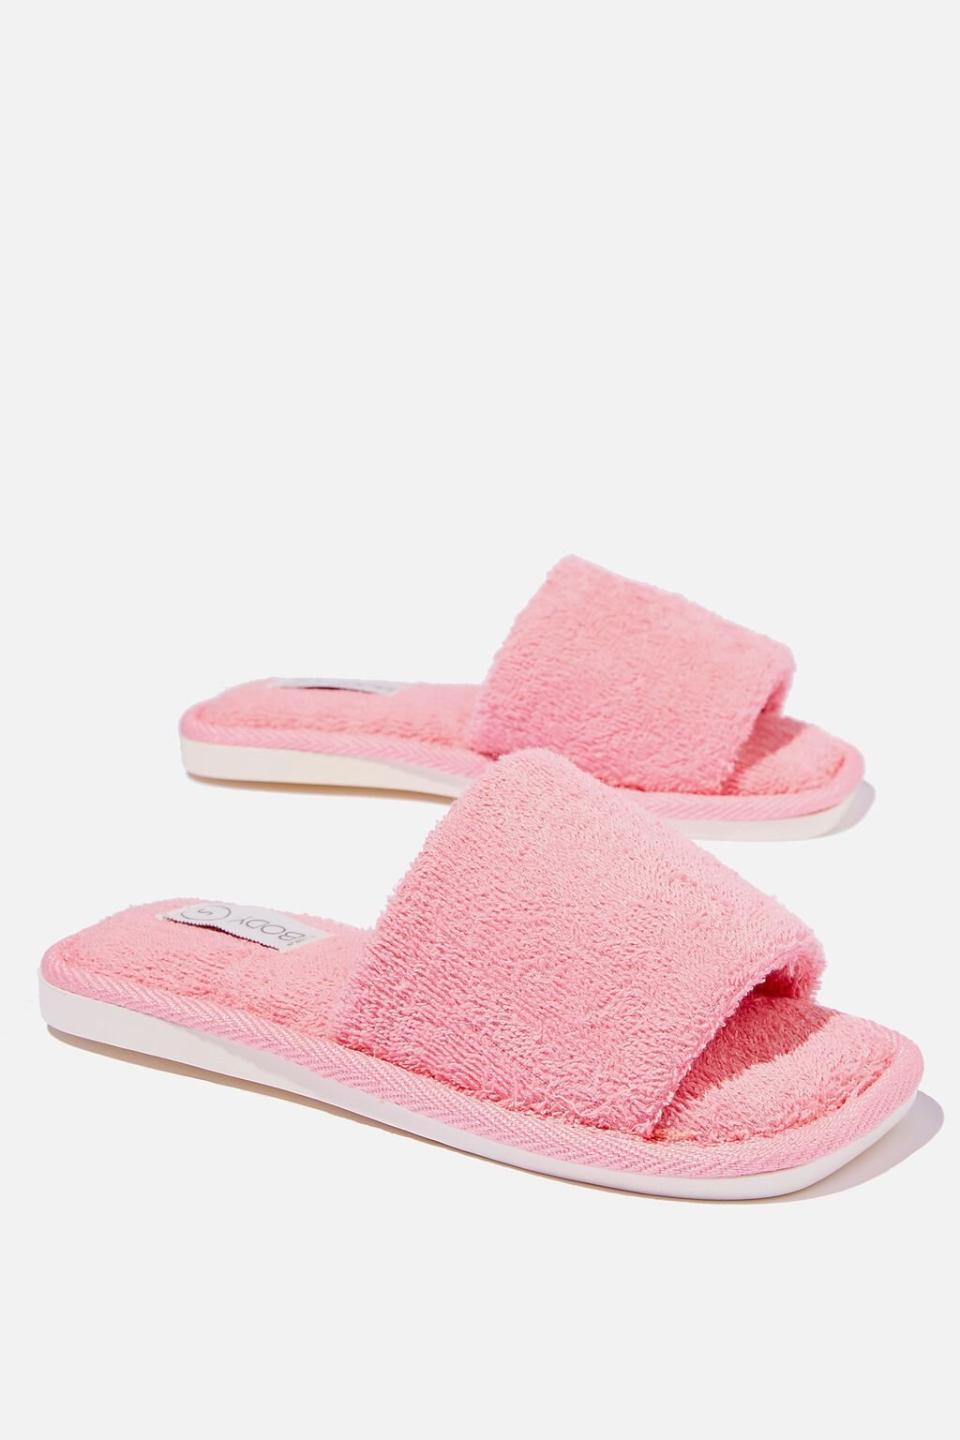 Luxe Towelling Slide, $19.99